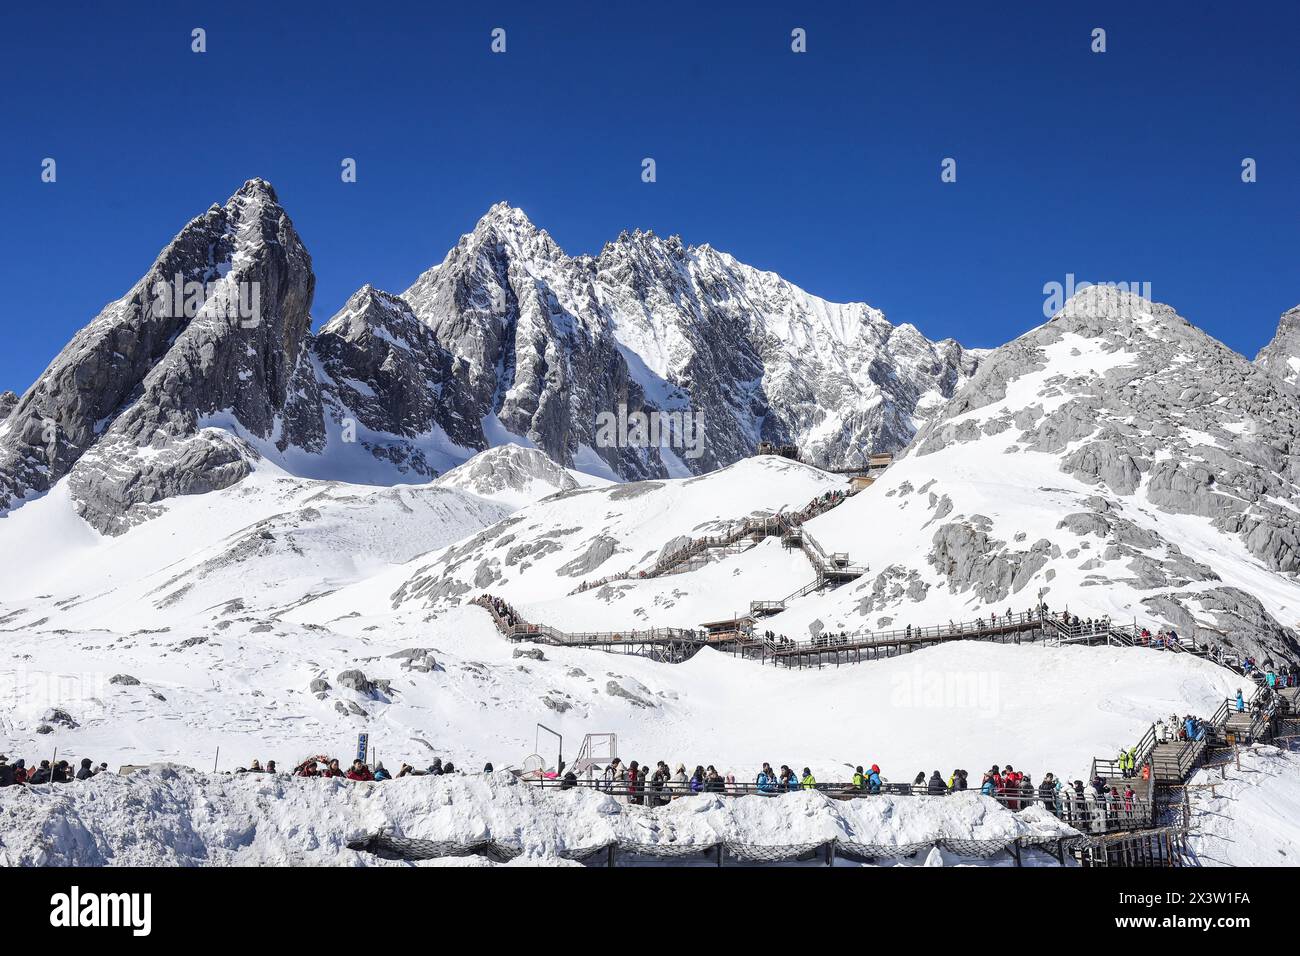 View at Jade Dragon Snow Mountain in Lijiang, Yunnan, China, with man-made steps leading to the peak Stock Photo